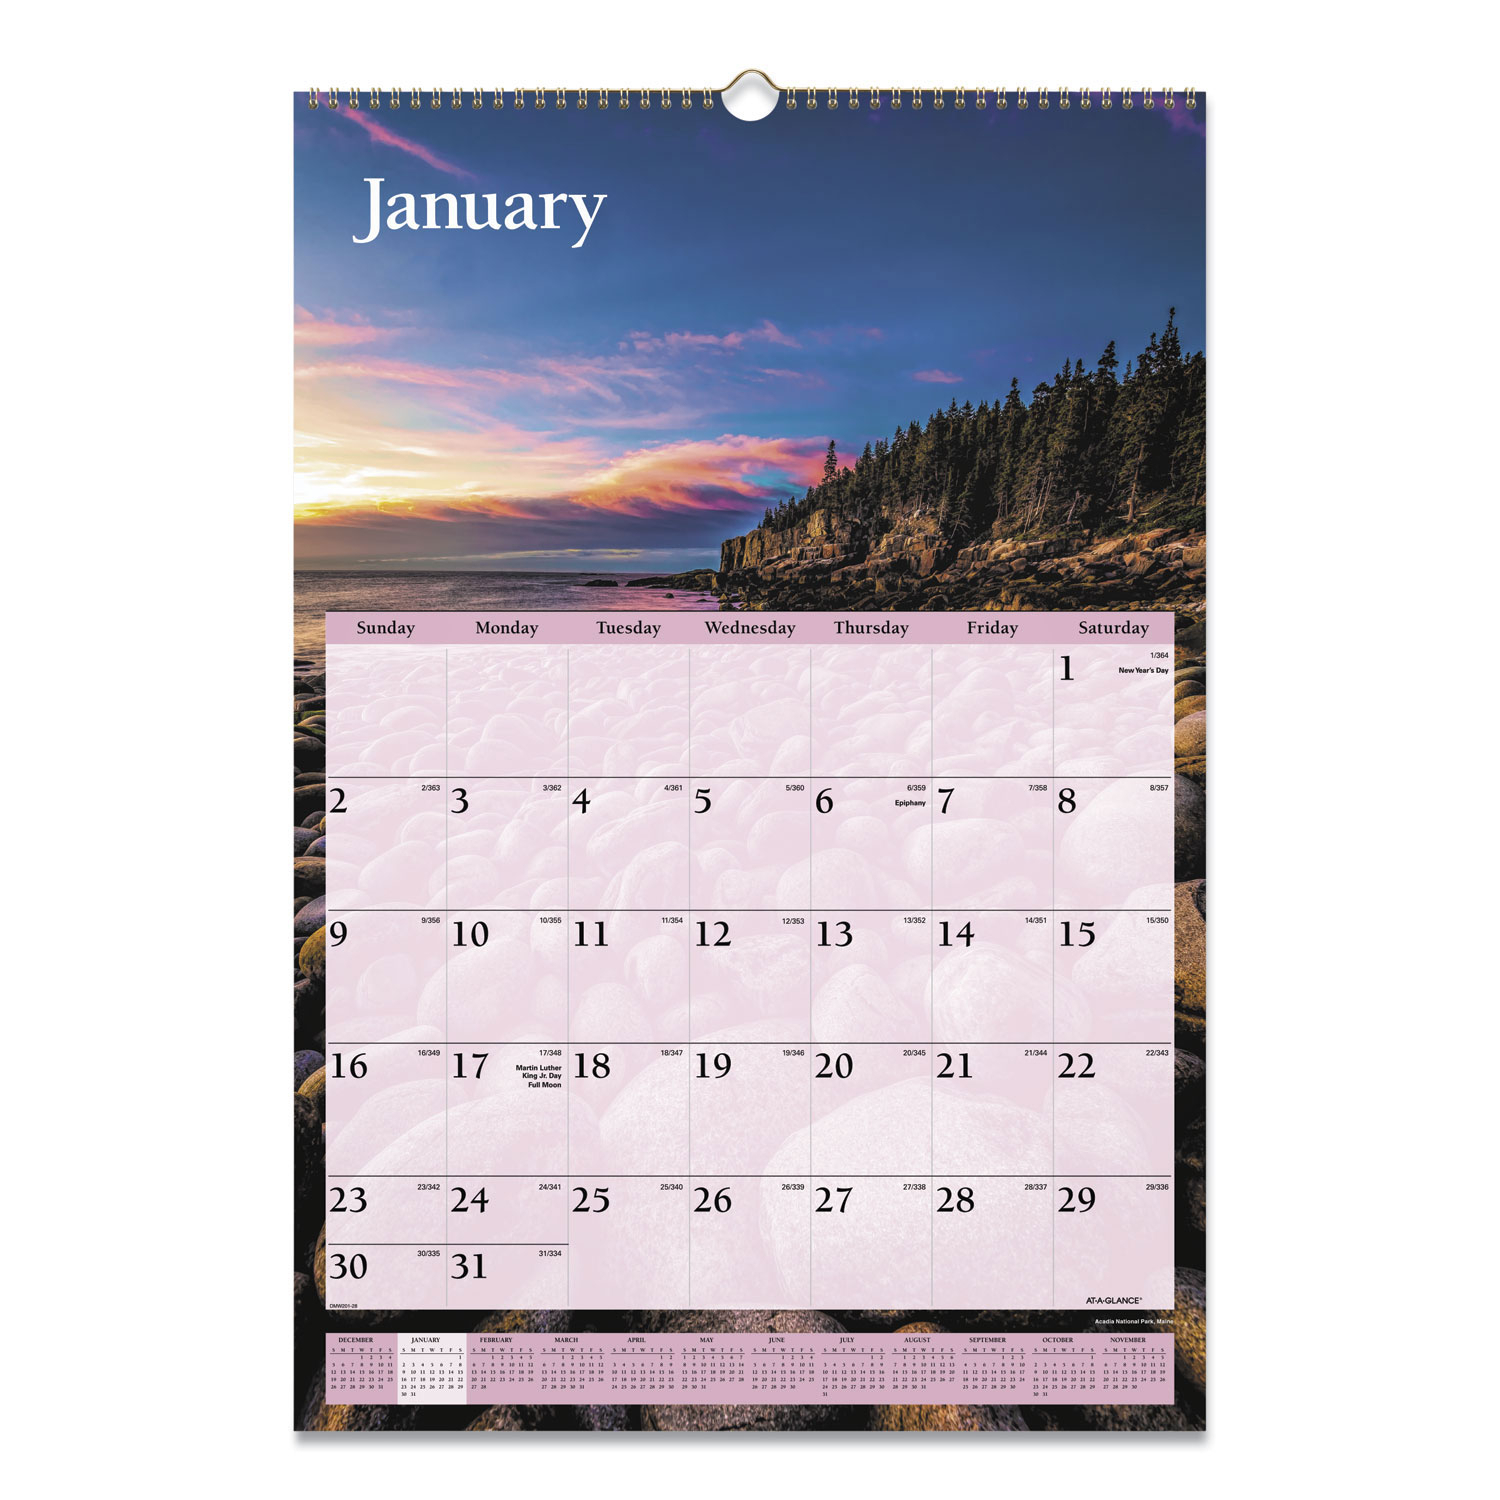 Acco Ataglance Scenic Monthly Wall Calendar | 15.5 X 22.75, 2022 within At A Glance Wall Calendar 2022